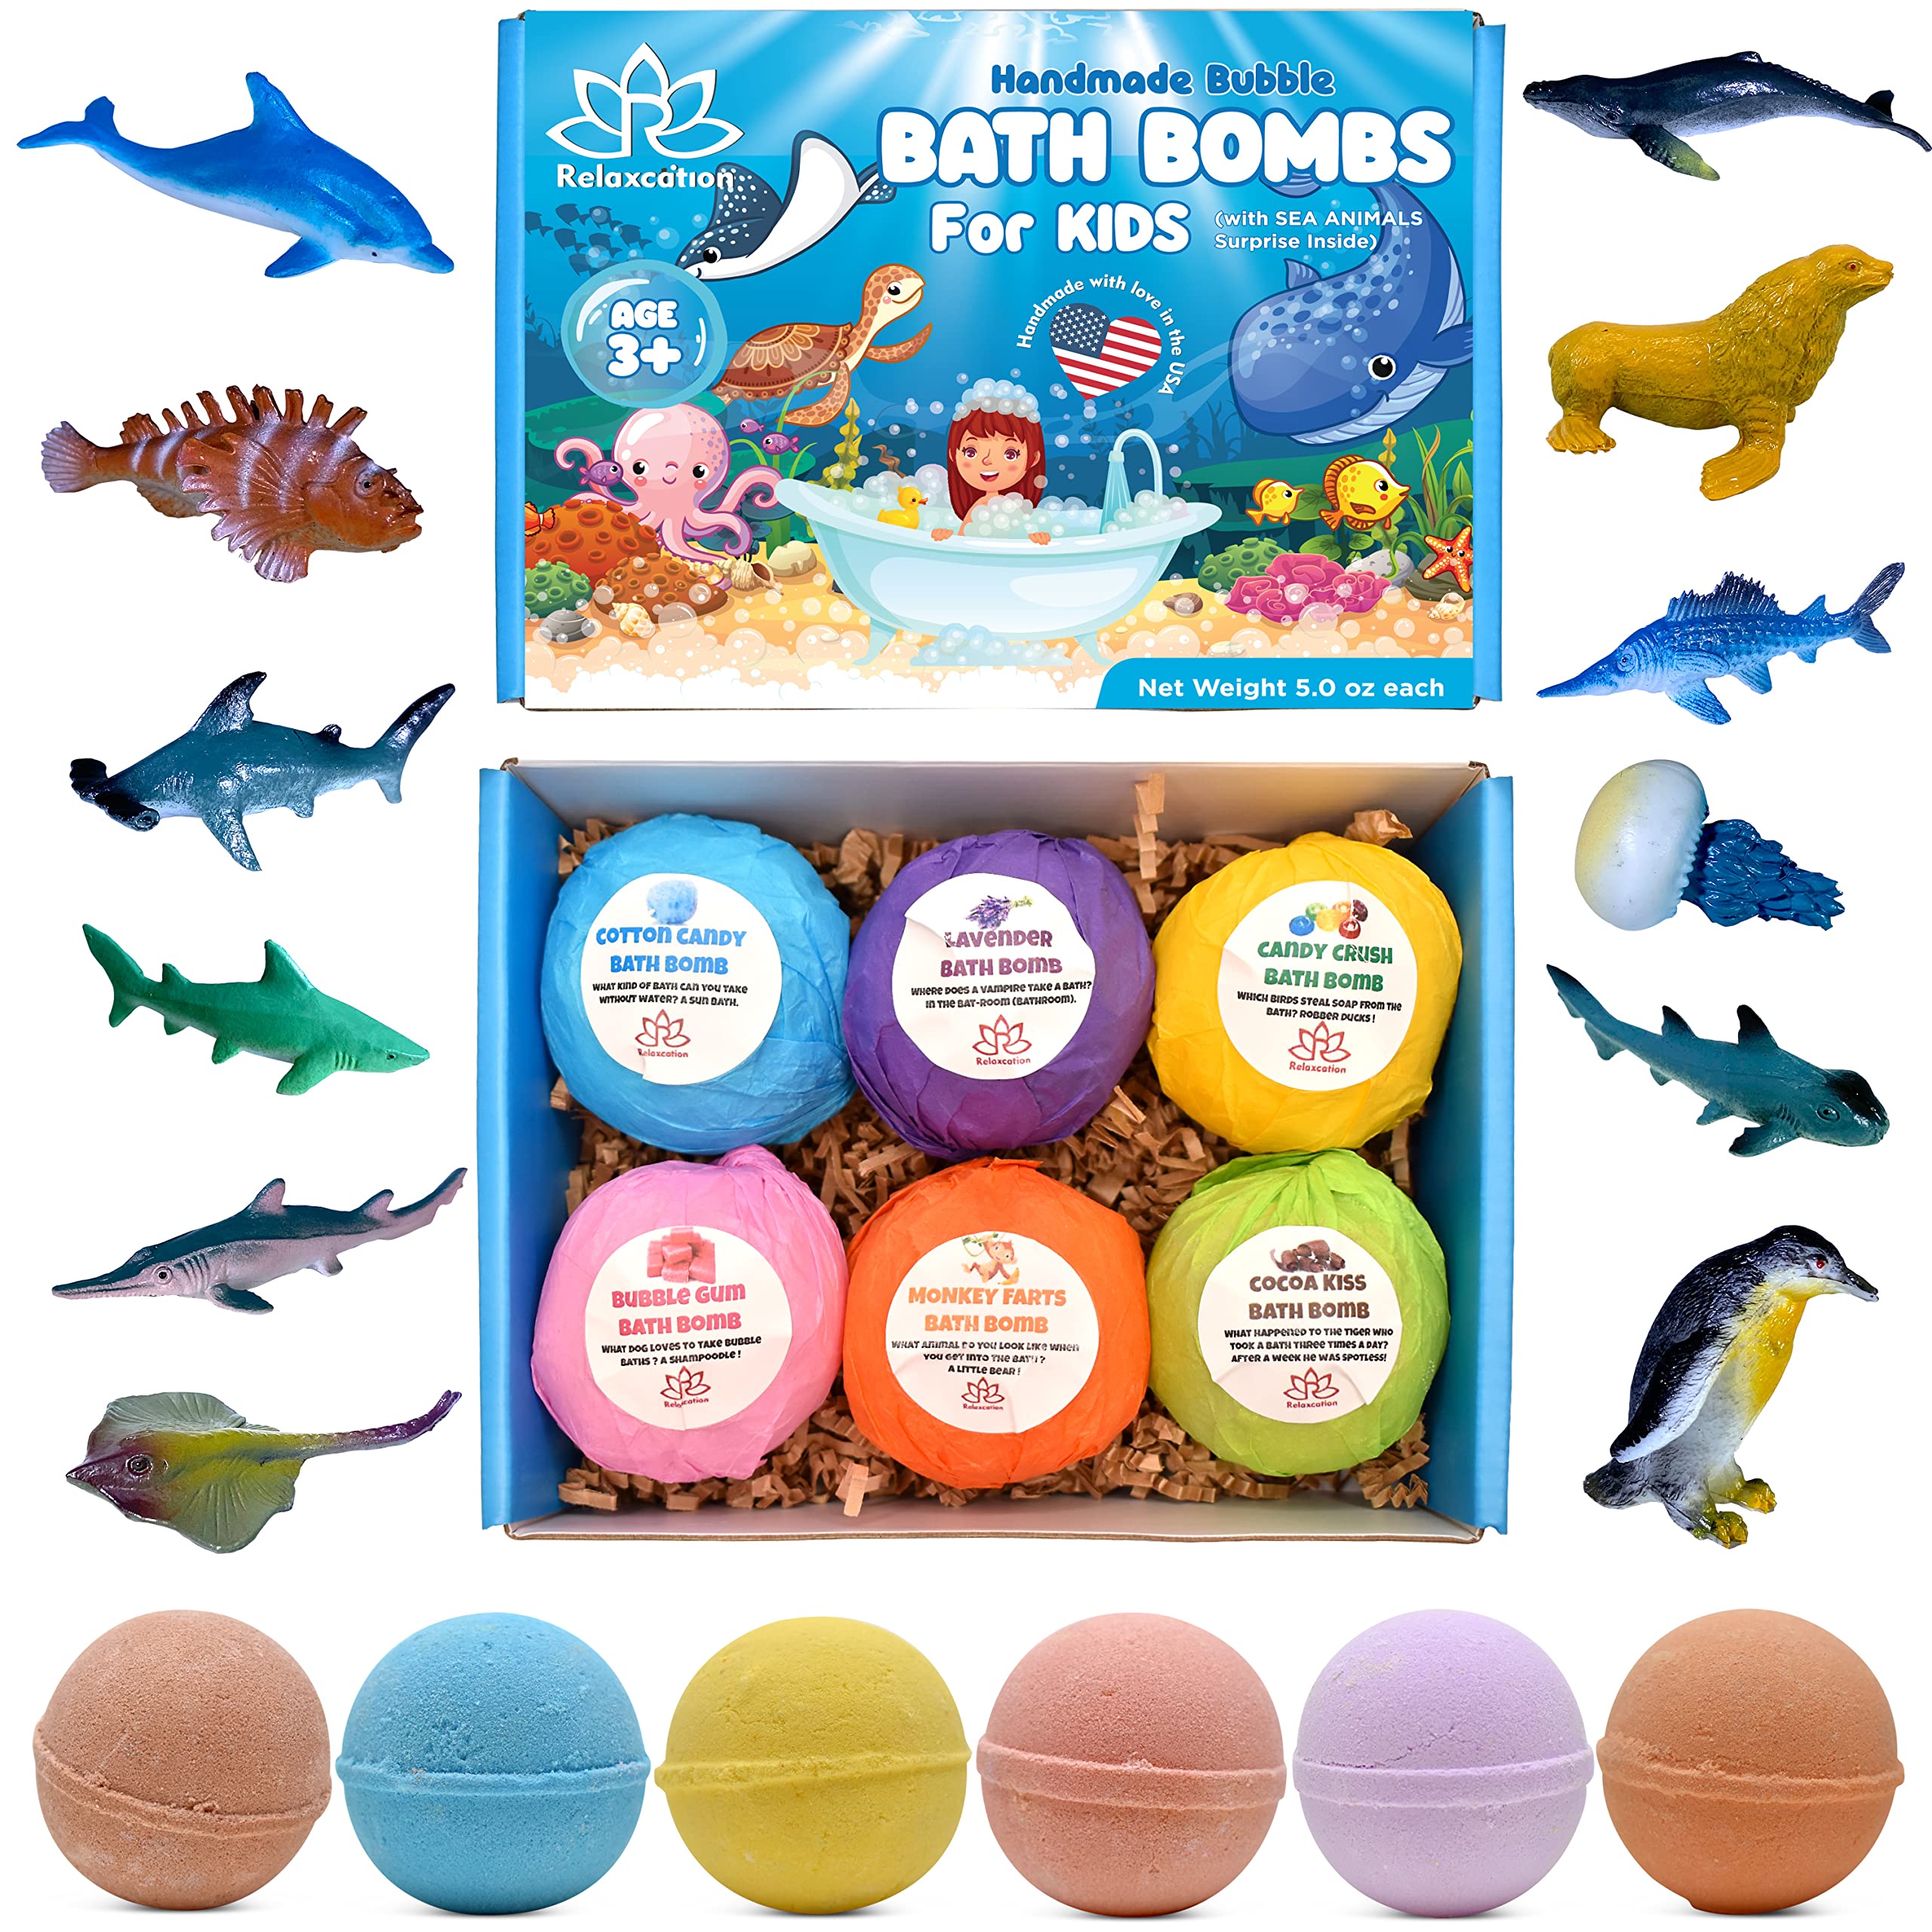 Bath Bombs for Kids with Surprise Inside SEA Animals Toys- Natural and Safe Bath Bombs Gift Set for Girls & Boys - Multicolored Organic Bubble Bath - Made in USA - Gift for Easter